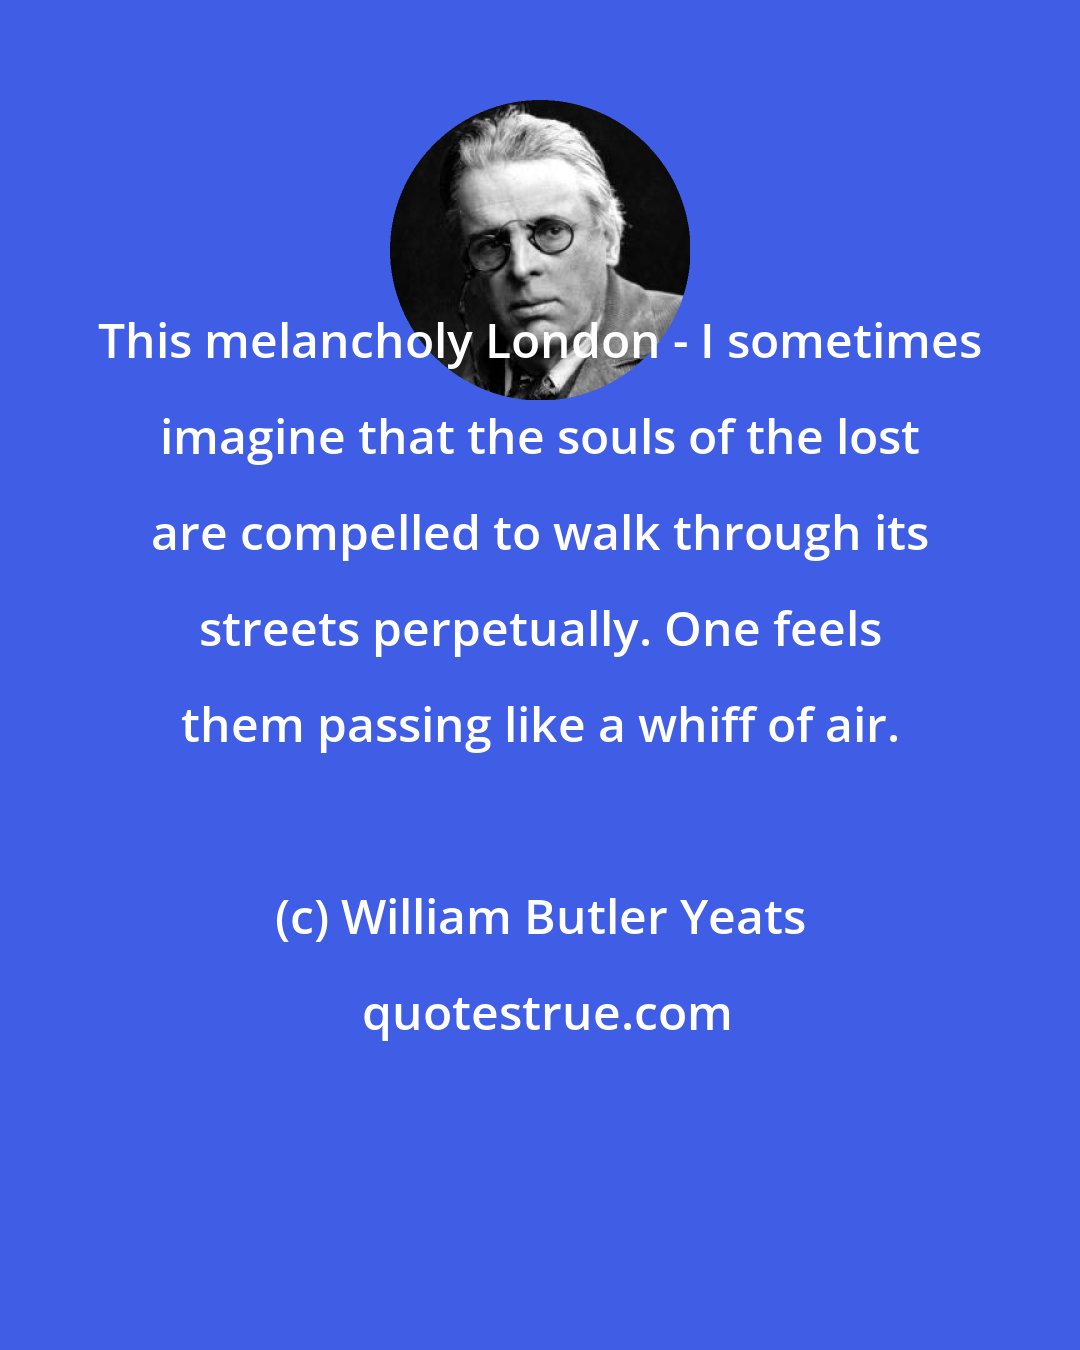 William Butler Yeats: This melancholy London - I sometimes imagine that the souls of the lost are compelled to walk through its streets perpetually. One feels them passing like a whiff of air.